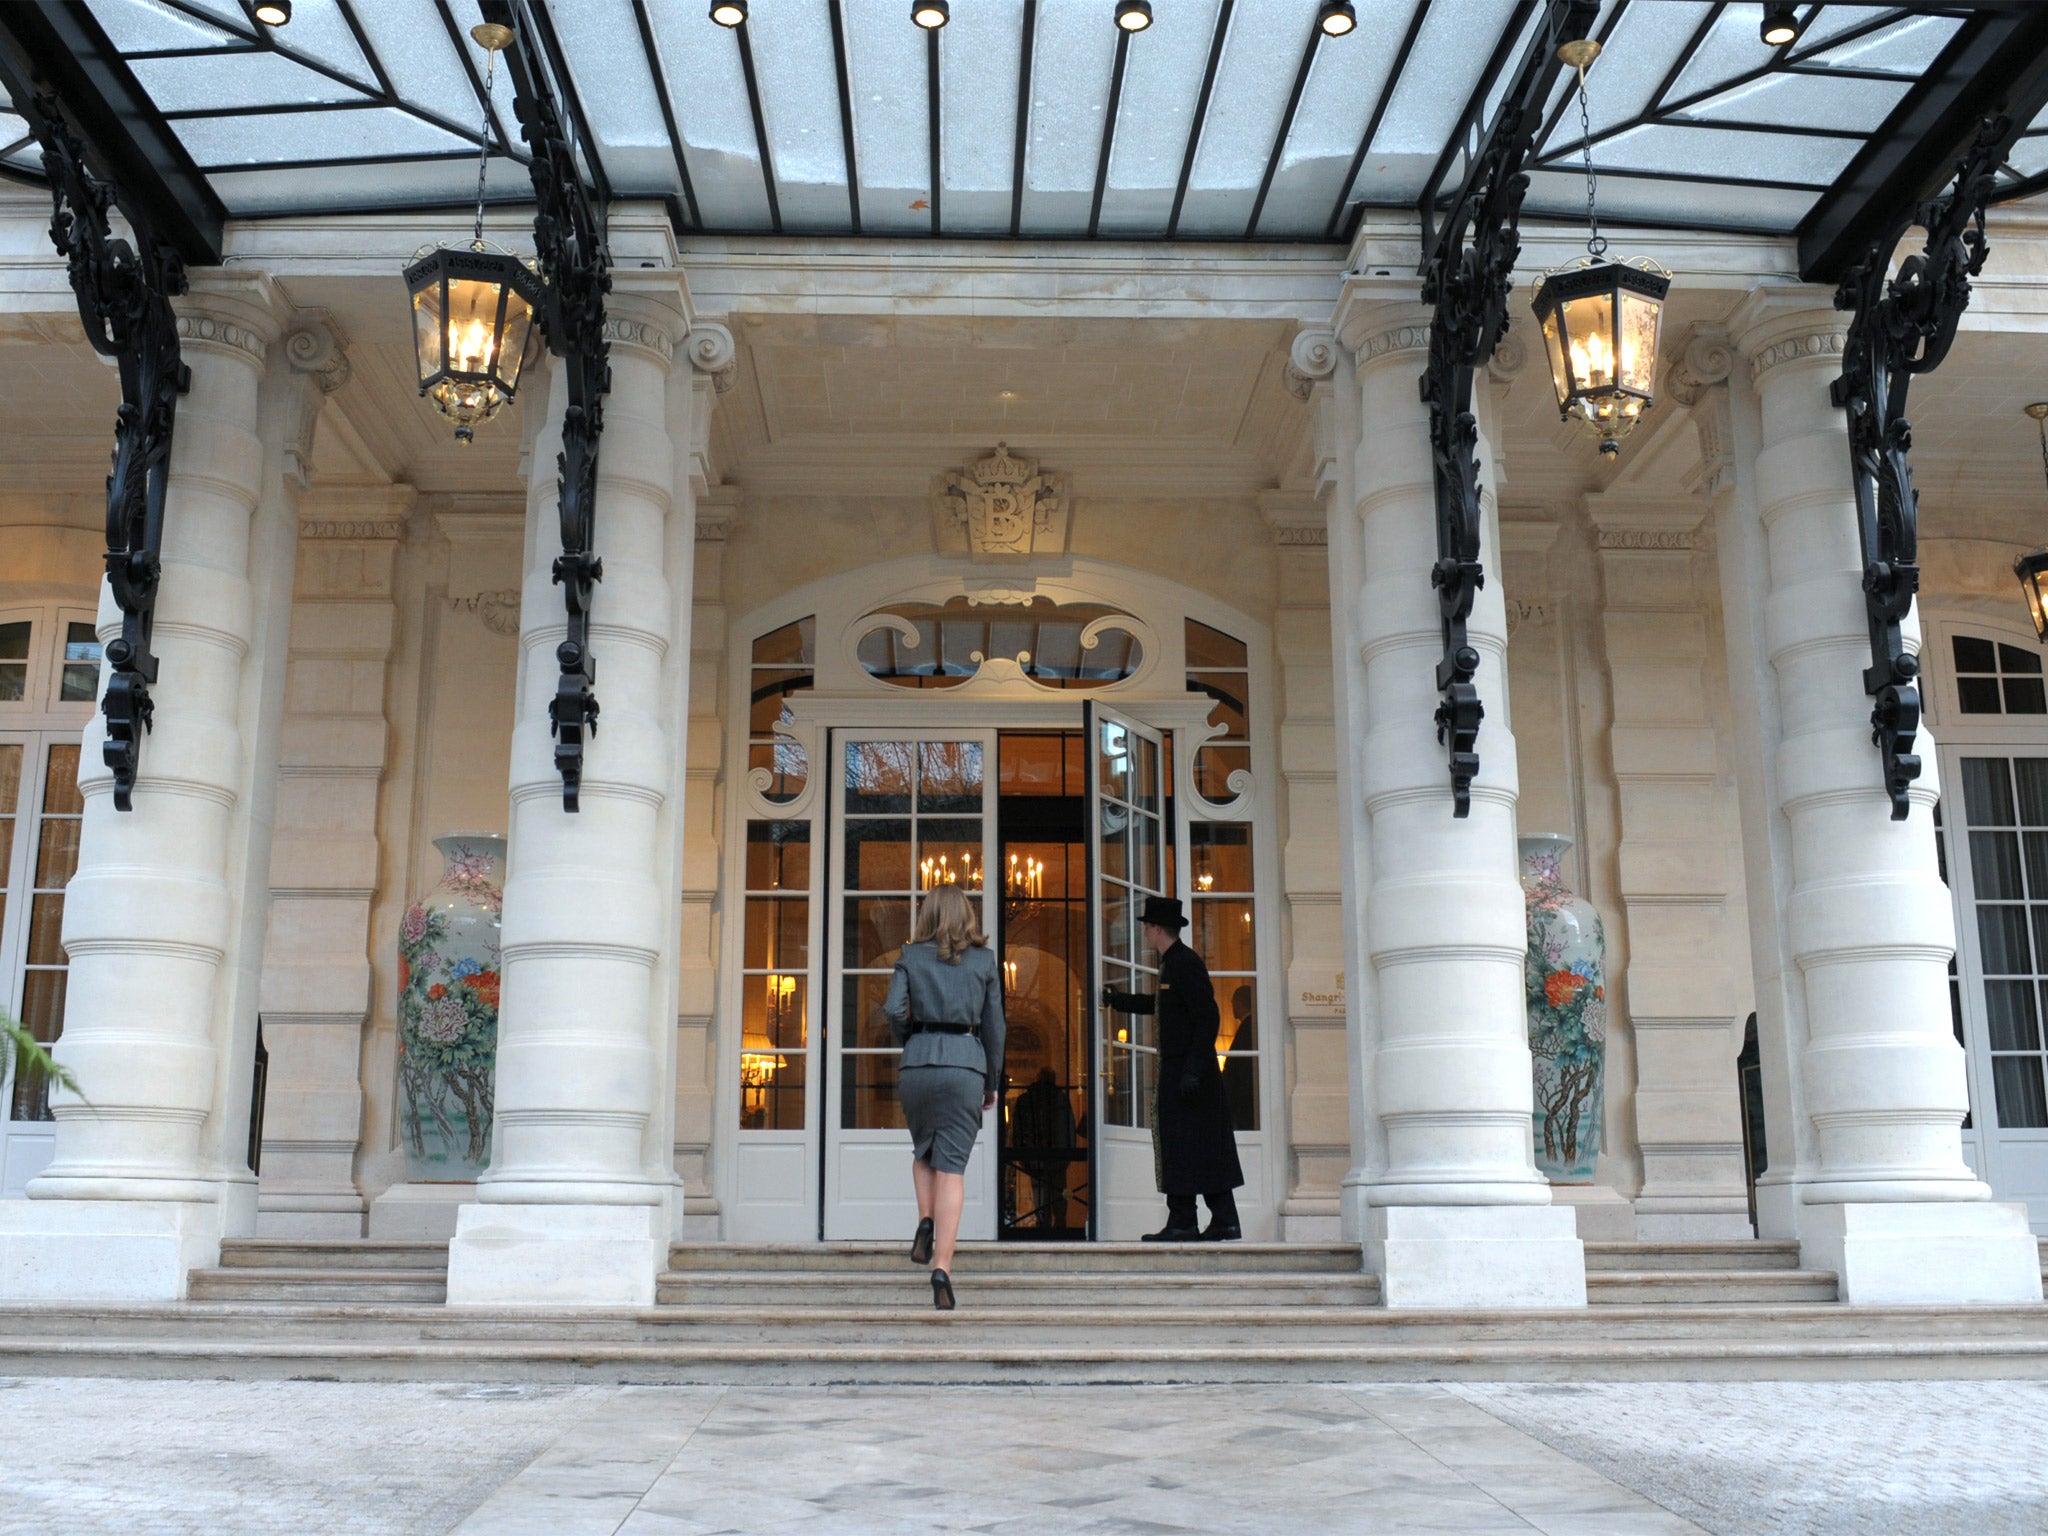 The Shangri-la Hotel in Paris where Princess Maha Al-Sudairi left without paying her €6m bill